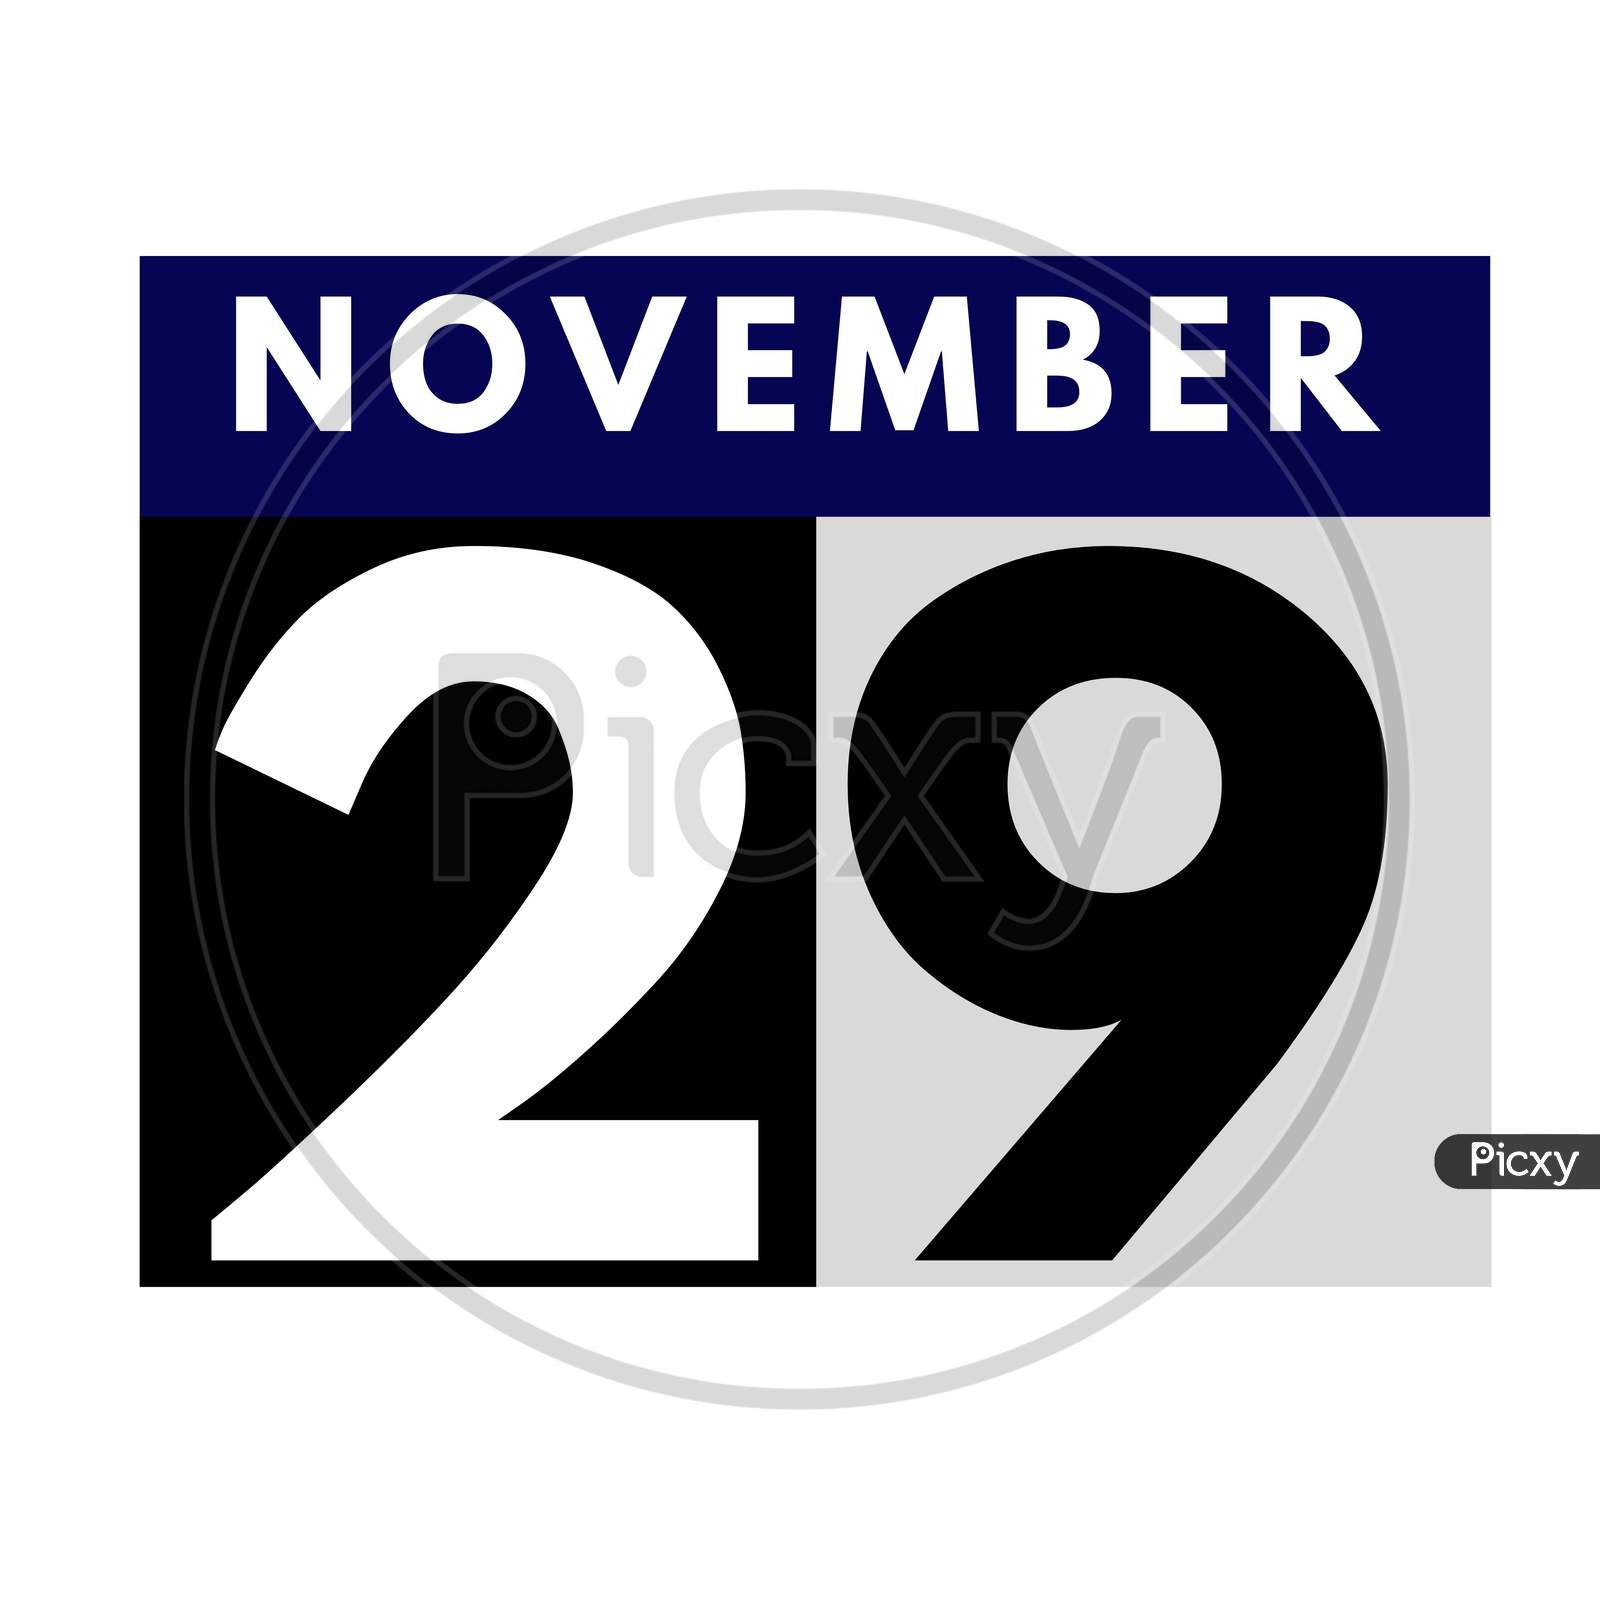 November 29 . Flat Daily Calendar Icon .Date ,Day, Month .Calendar For The Month Of November